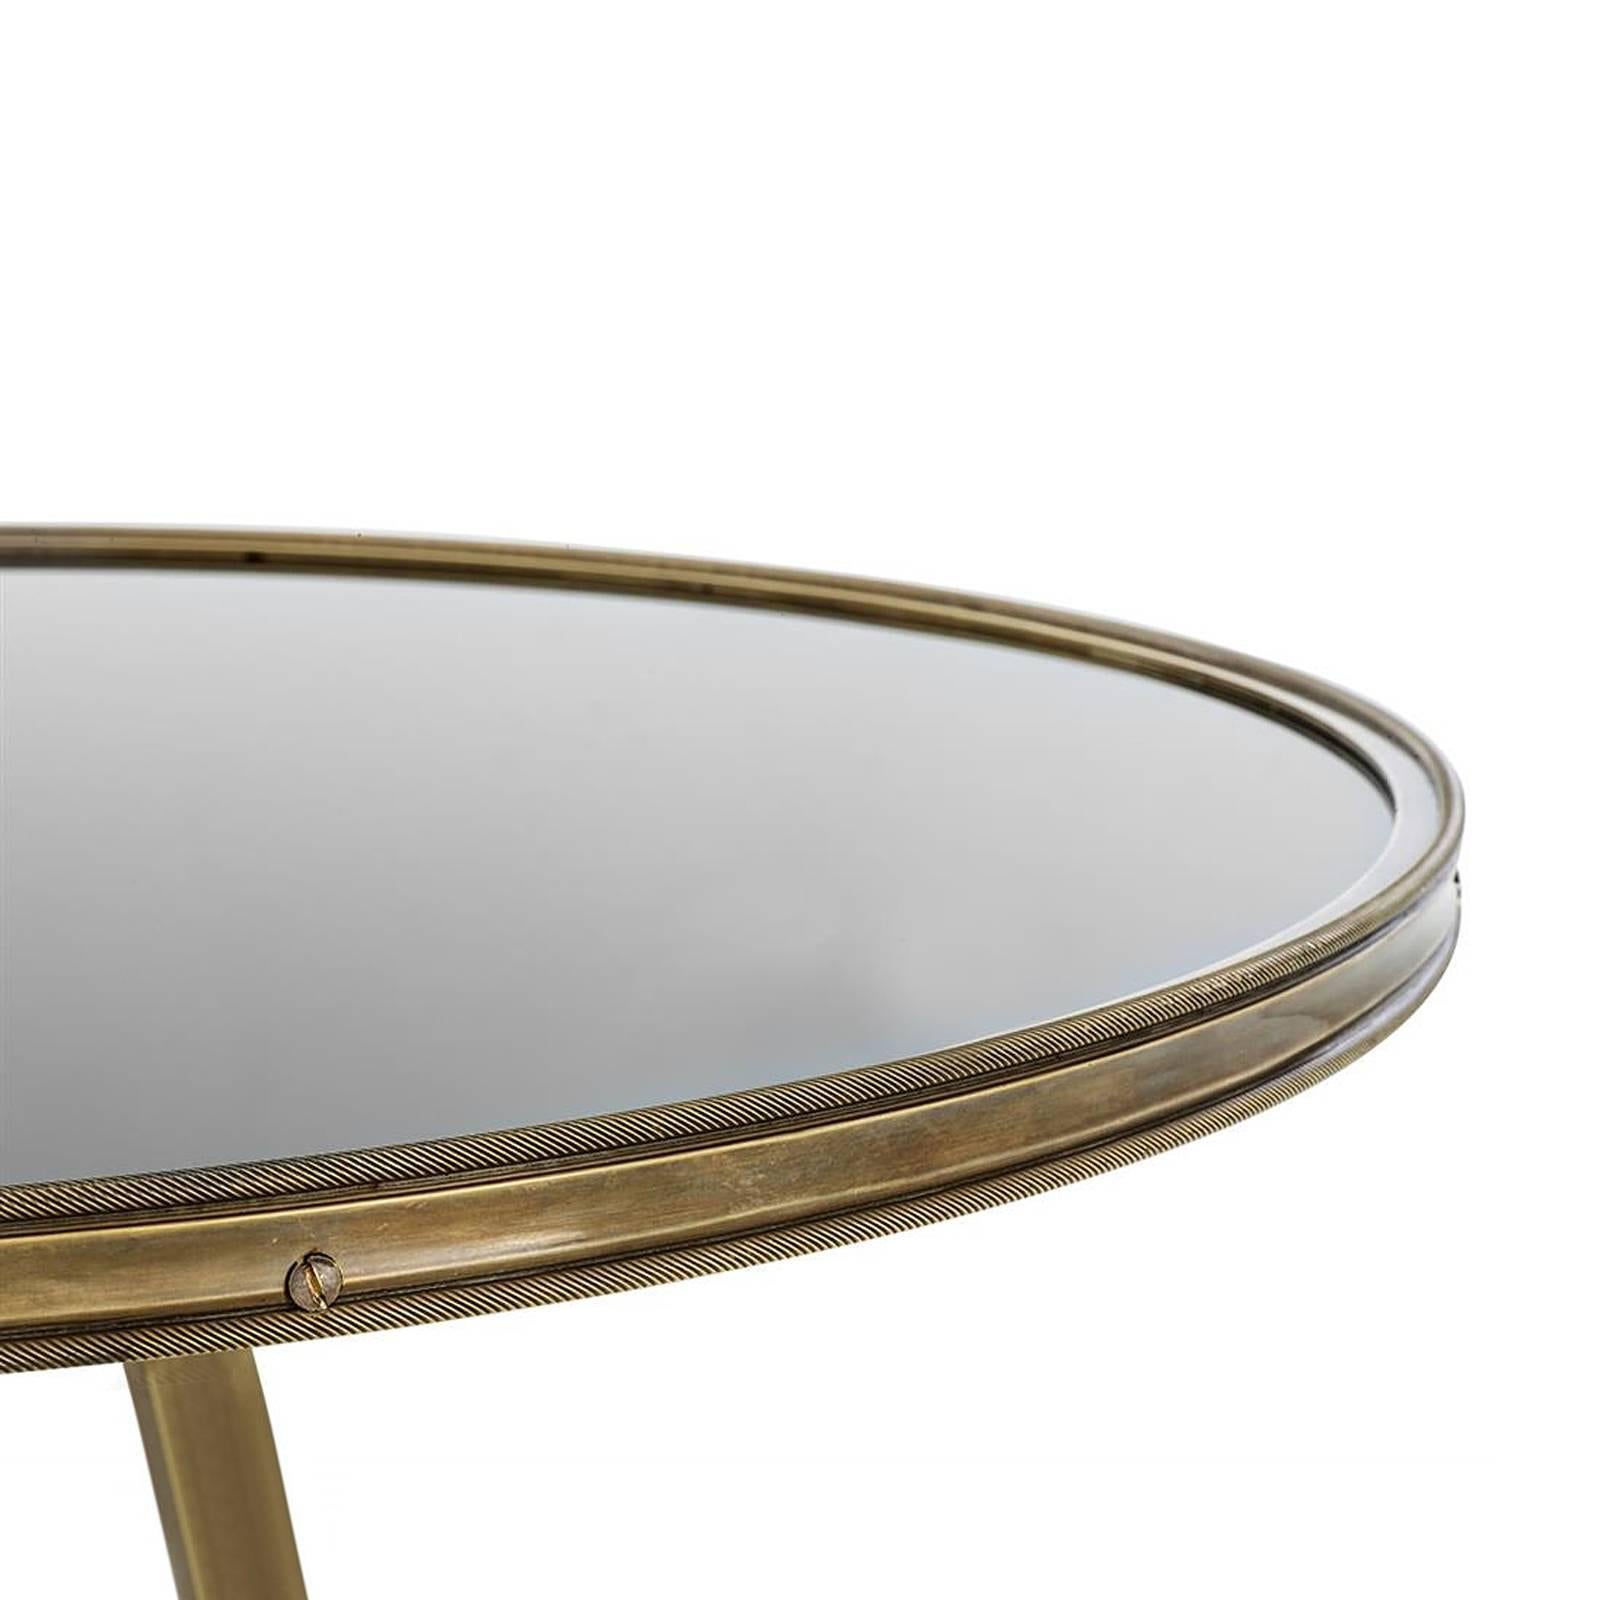 Side table cupidon with structure in 
antique brass finish. With black glass top.
Also available in antique silver plated finish
with black glass top.
 